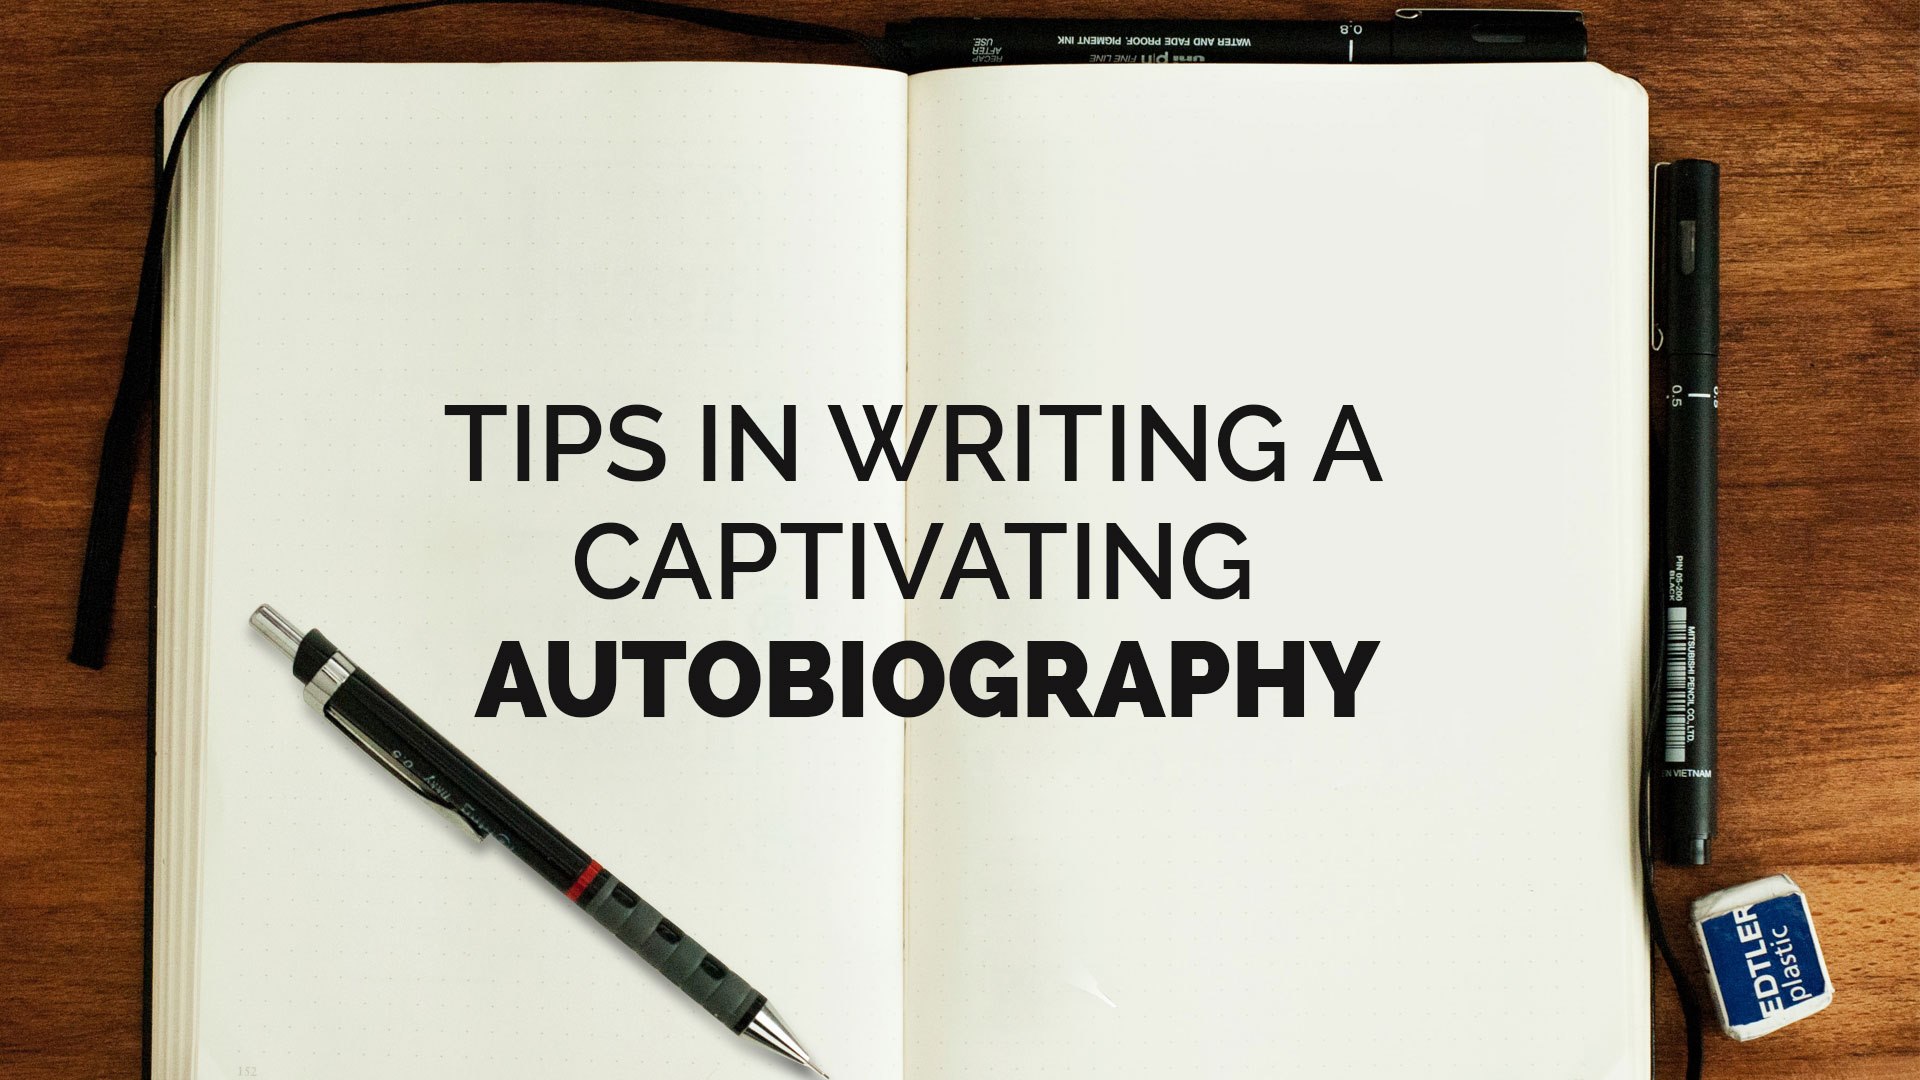 Tips in Writing a Captivating Autobiography